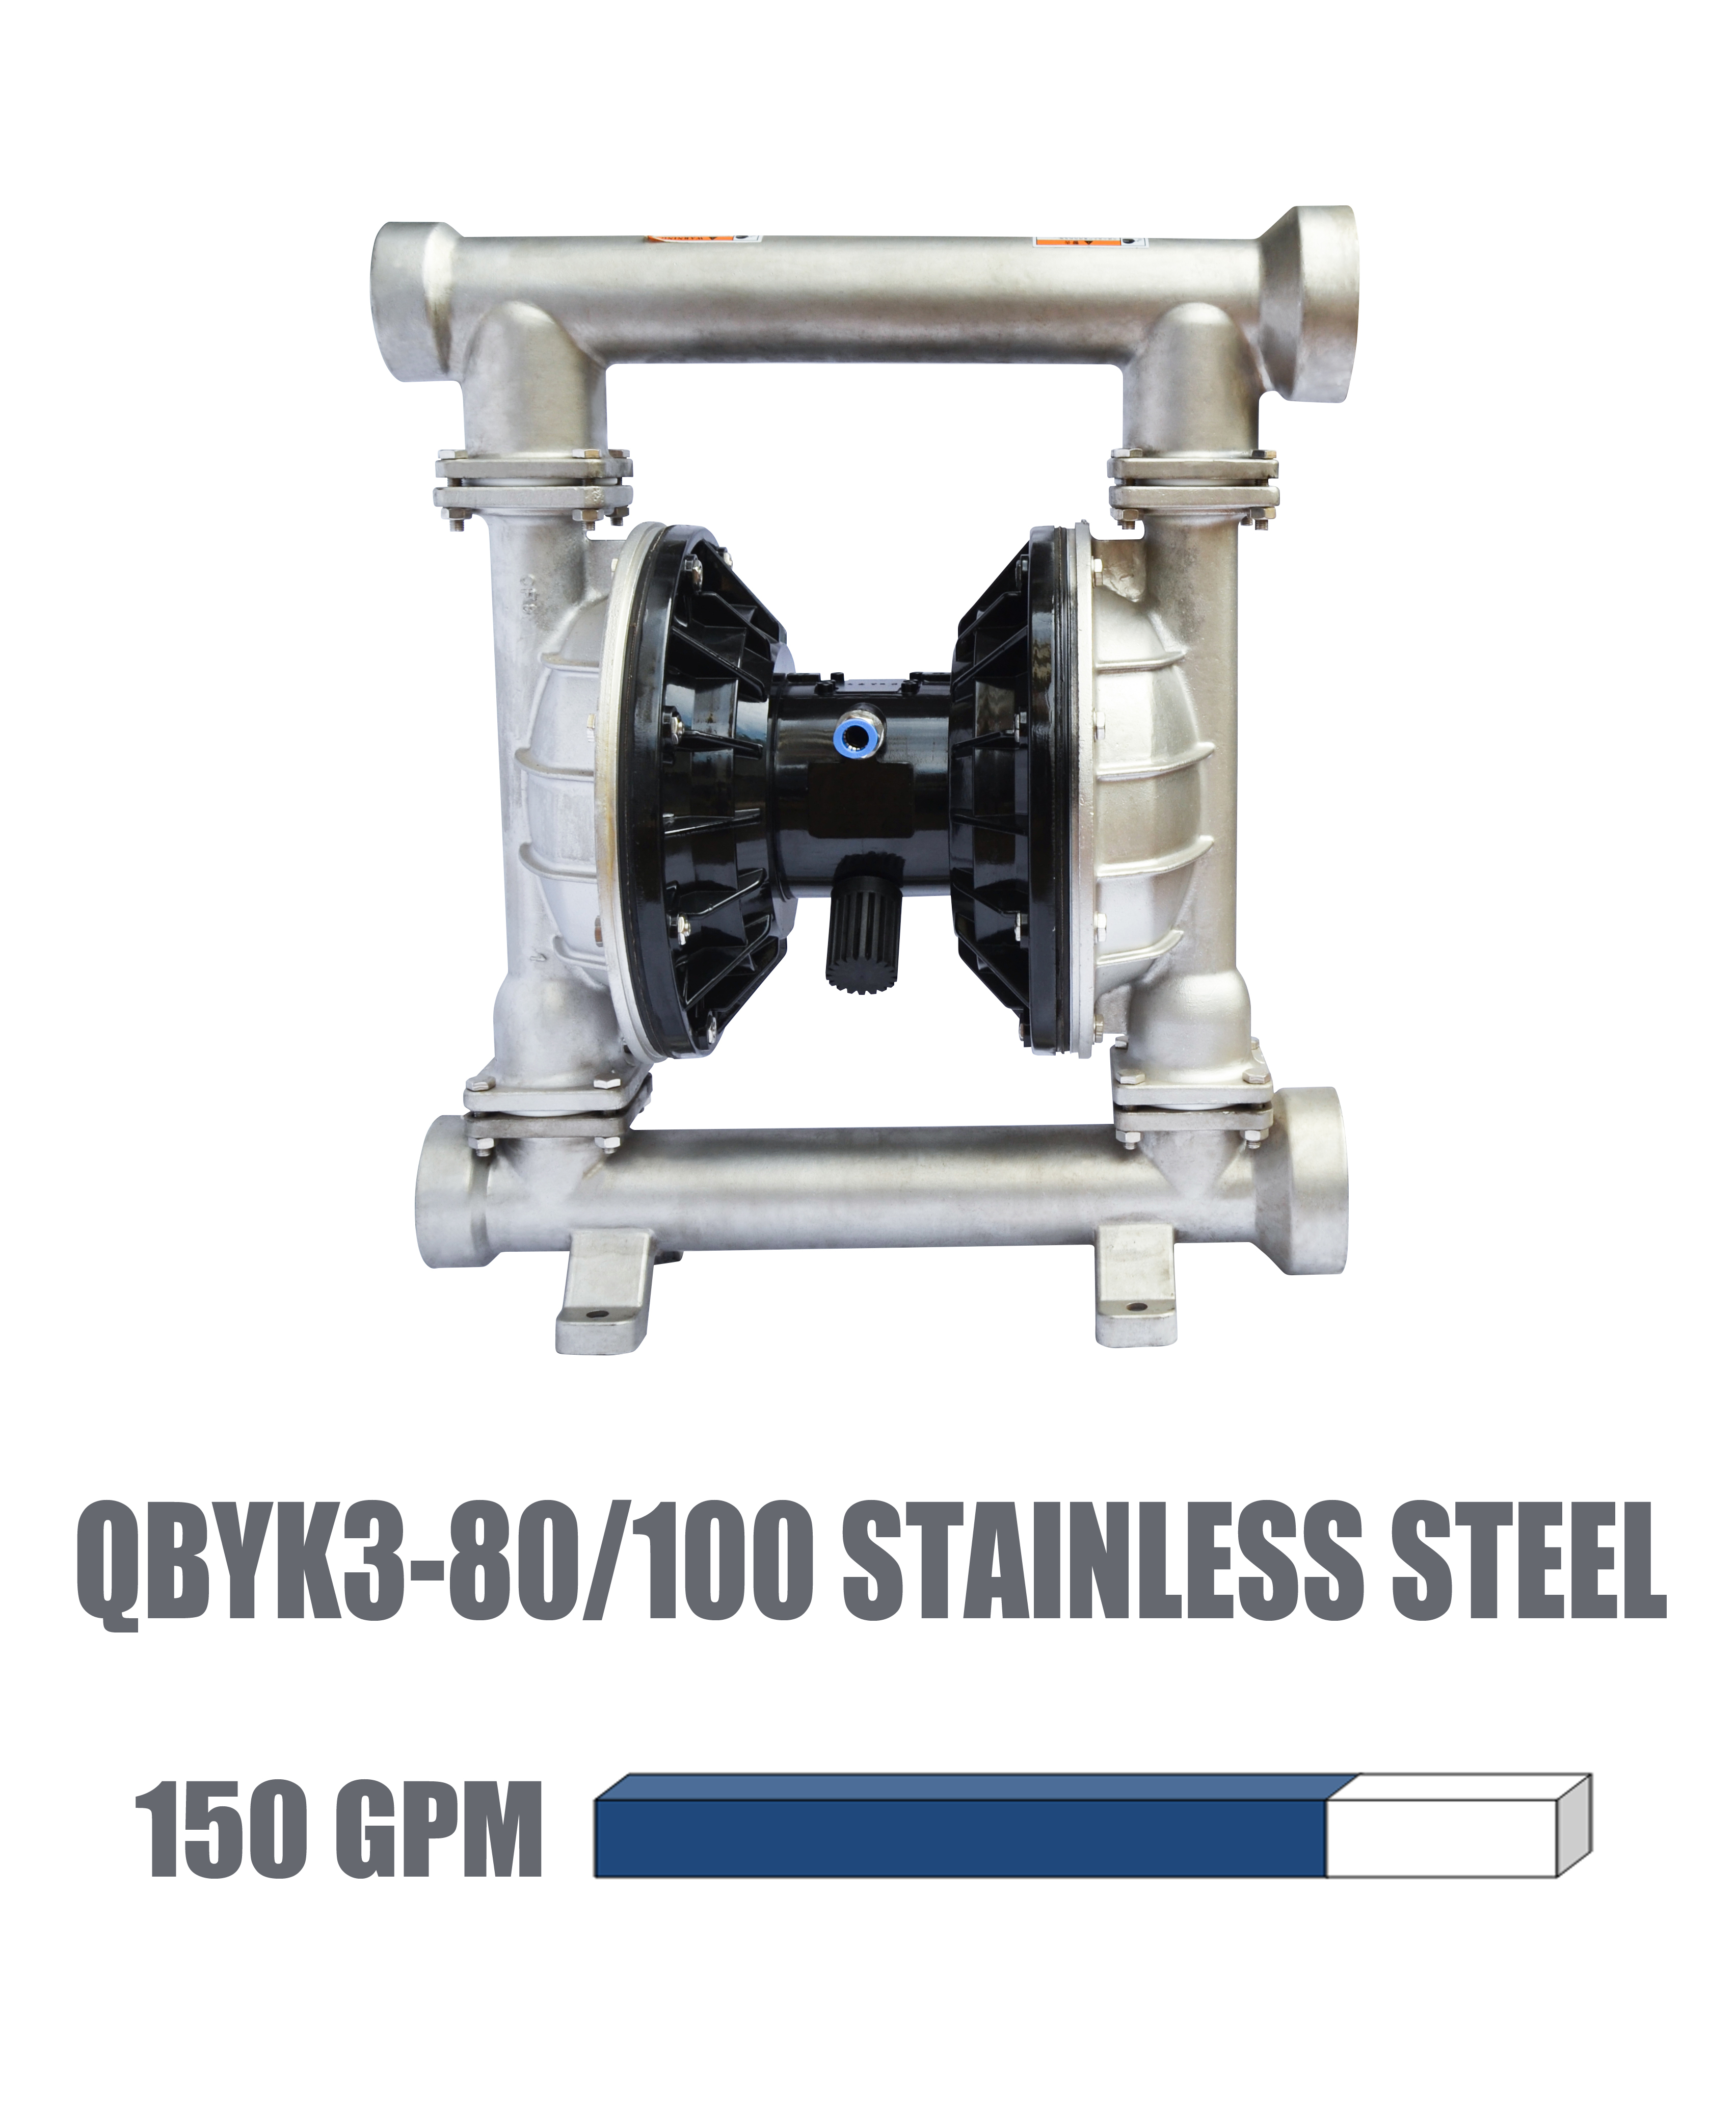 QBYK3-80/100  Stainless steel